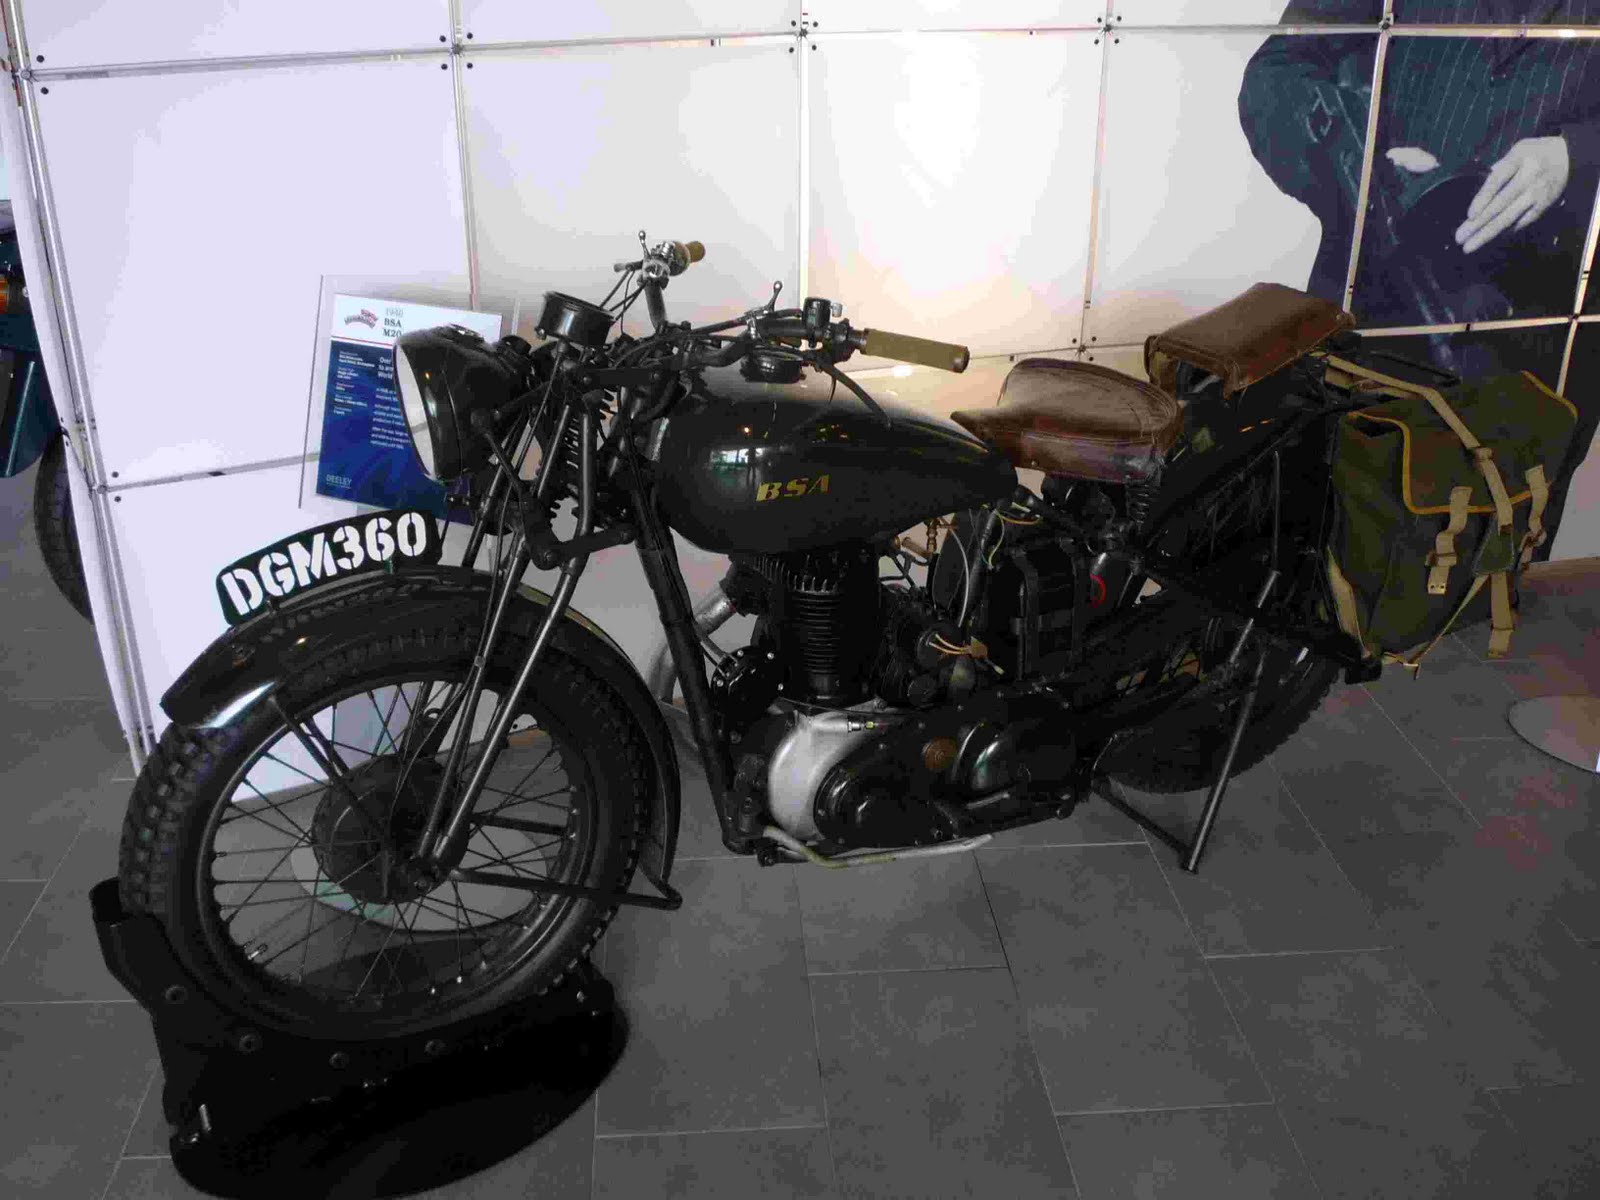 A Brief History on Hill-Climb Motorcycles - Deeley Exhibition